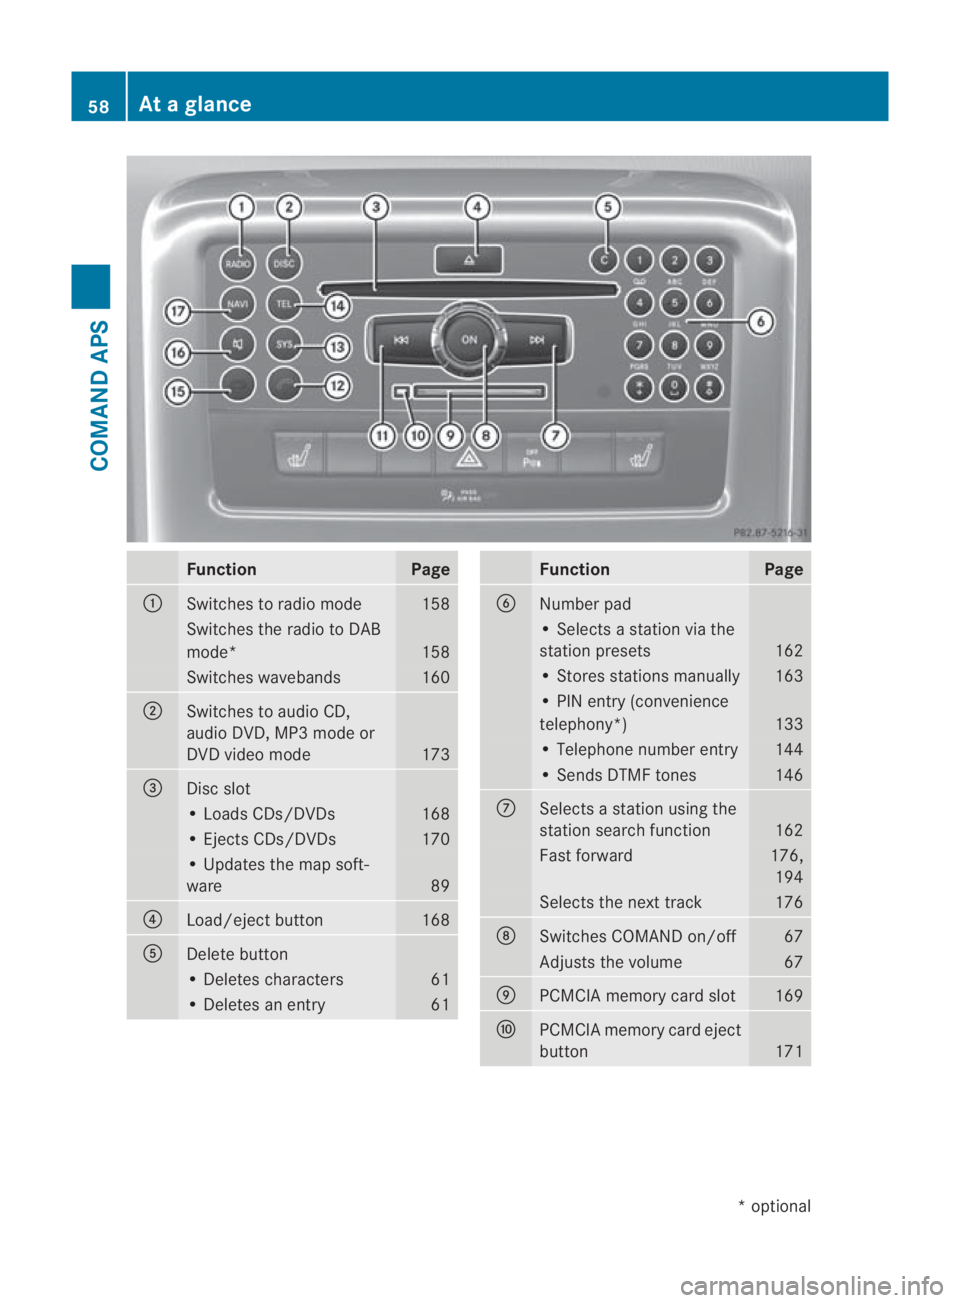 MERCEDES-BENZ SLS COUPE 2010  Owners Manual Function Page
0001
Switches to radio mode 158
Switches the radio to DAB
mode*
158
Switches wavebands 160
0002
Switches to audio CD,
audio DVD, MP3 mode or
DVD video mode
173
0015
Dis
cslot • Loads C